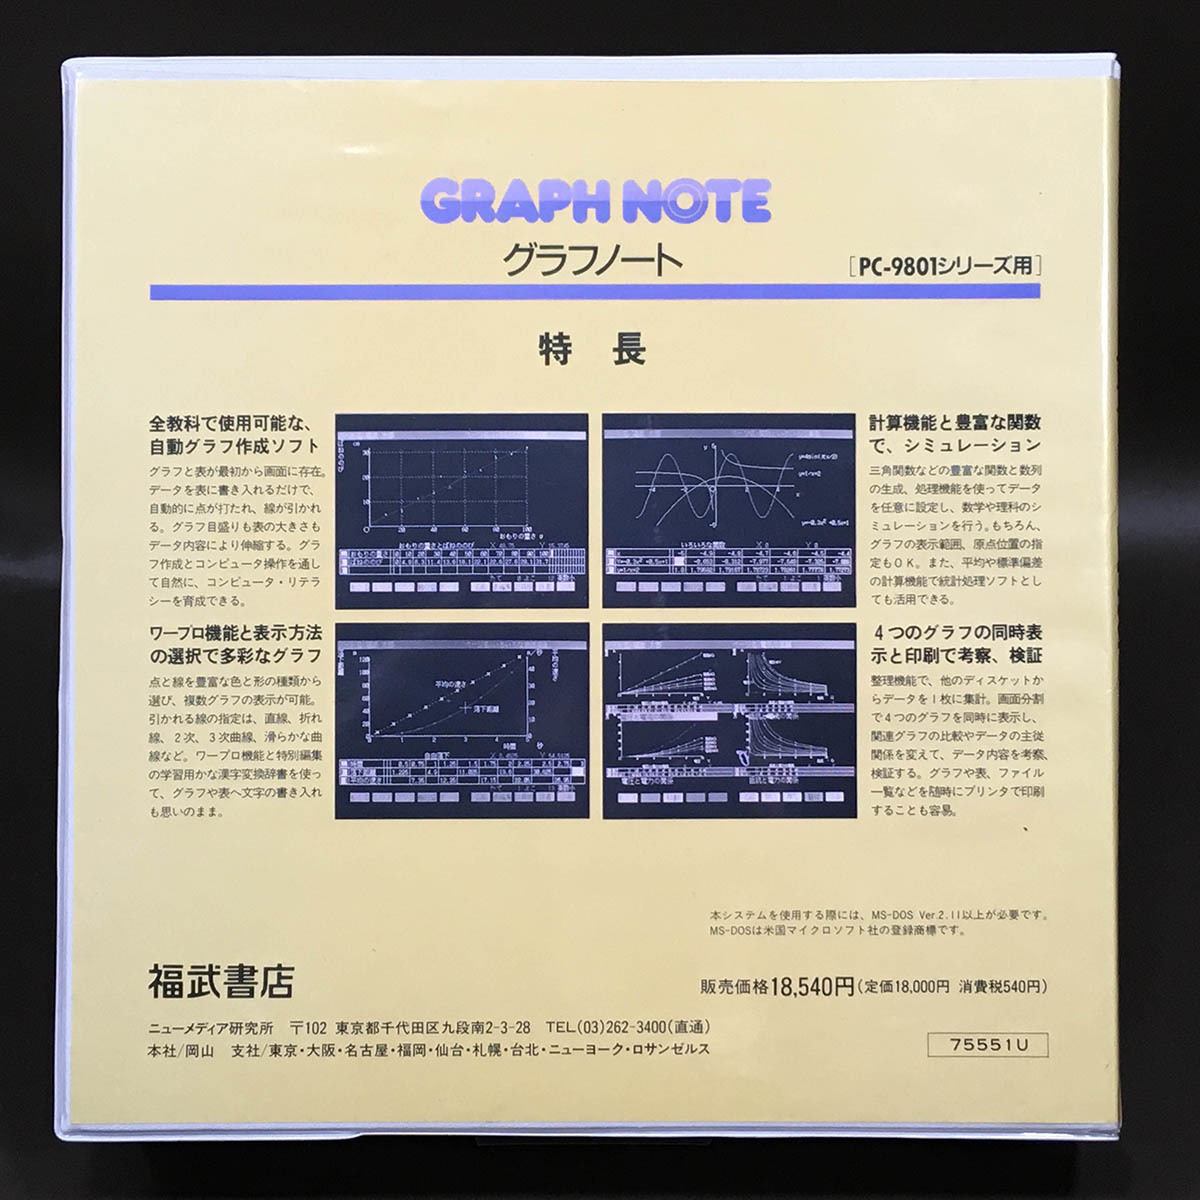  luck . bookstore lGRAPH NOTElPC-9801 series for l2HDl75551Ul graph Note lbenesel31592